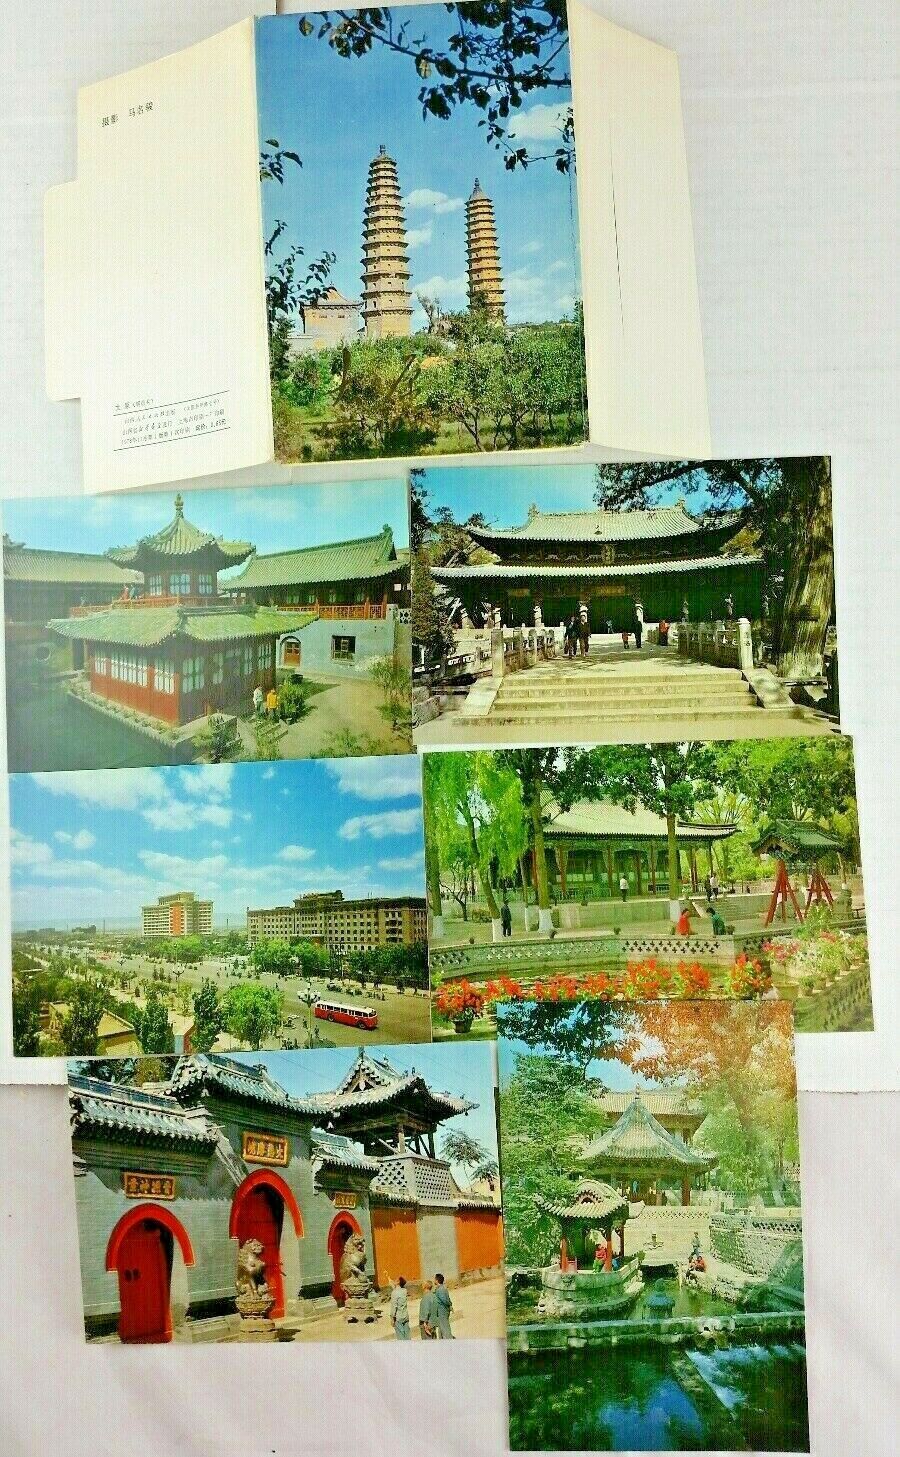 Lot of 6 Vintage Chinese China Taiyuan Postcards Mint